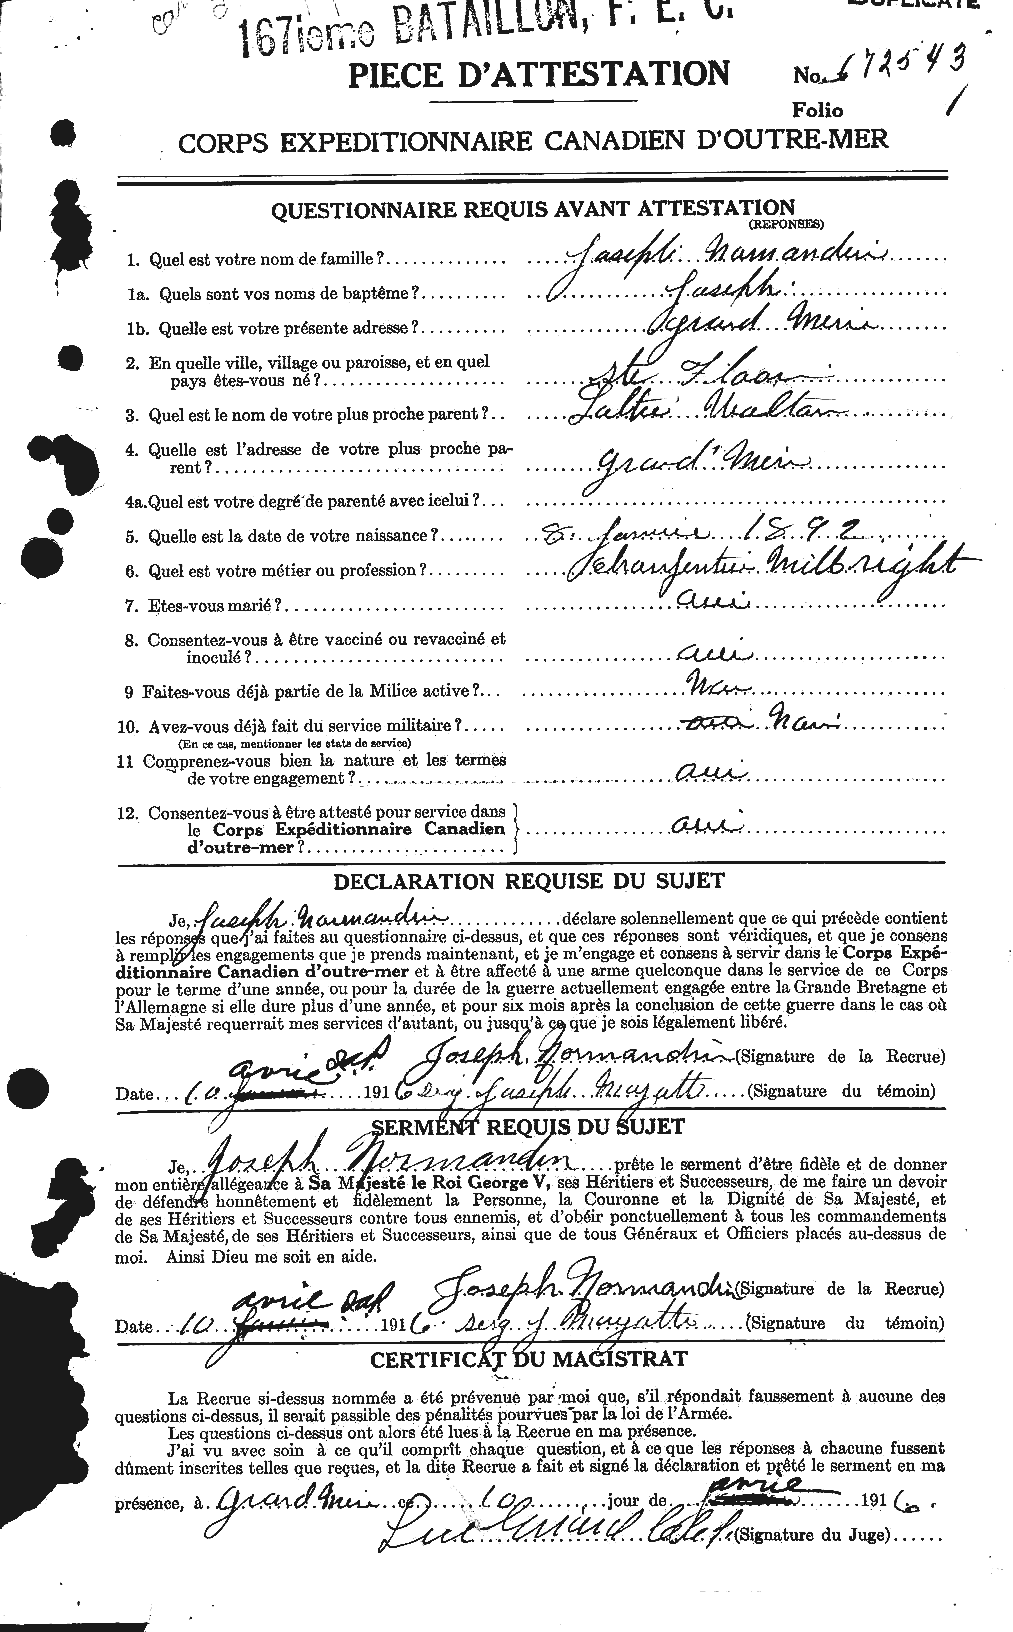 Personnel Records of the First World War - CEF 552292a